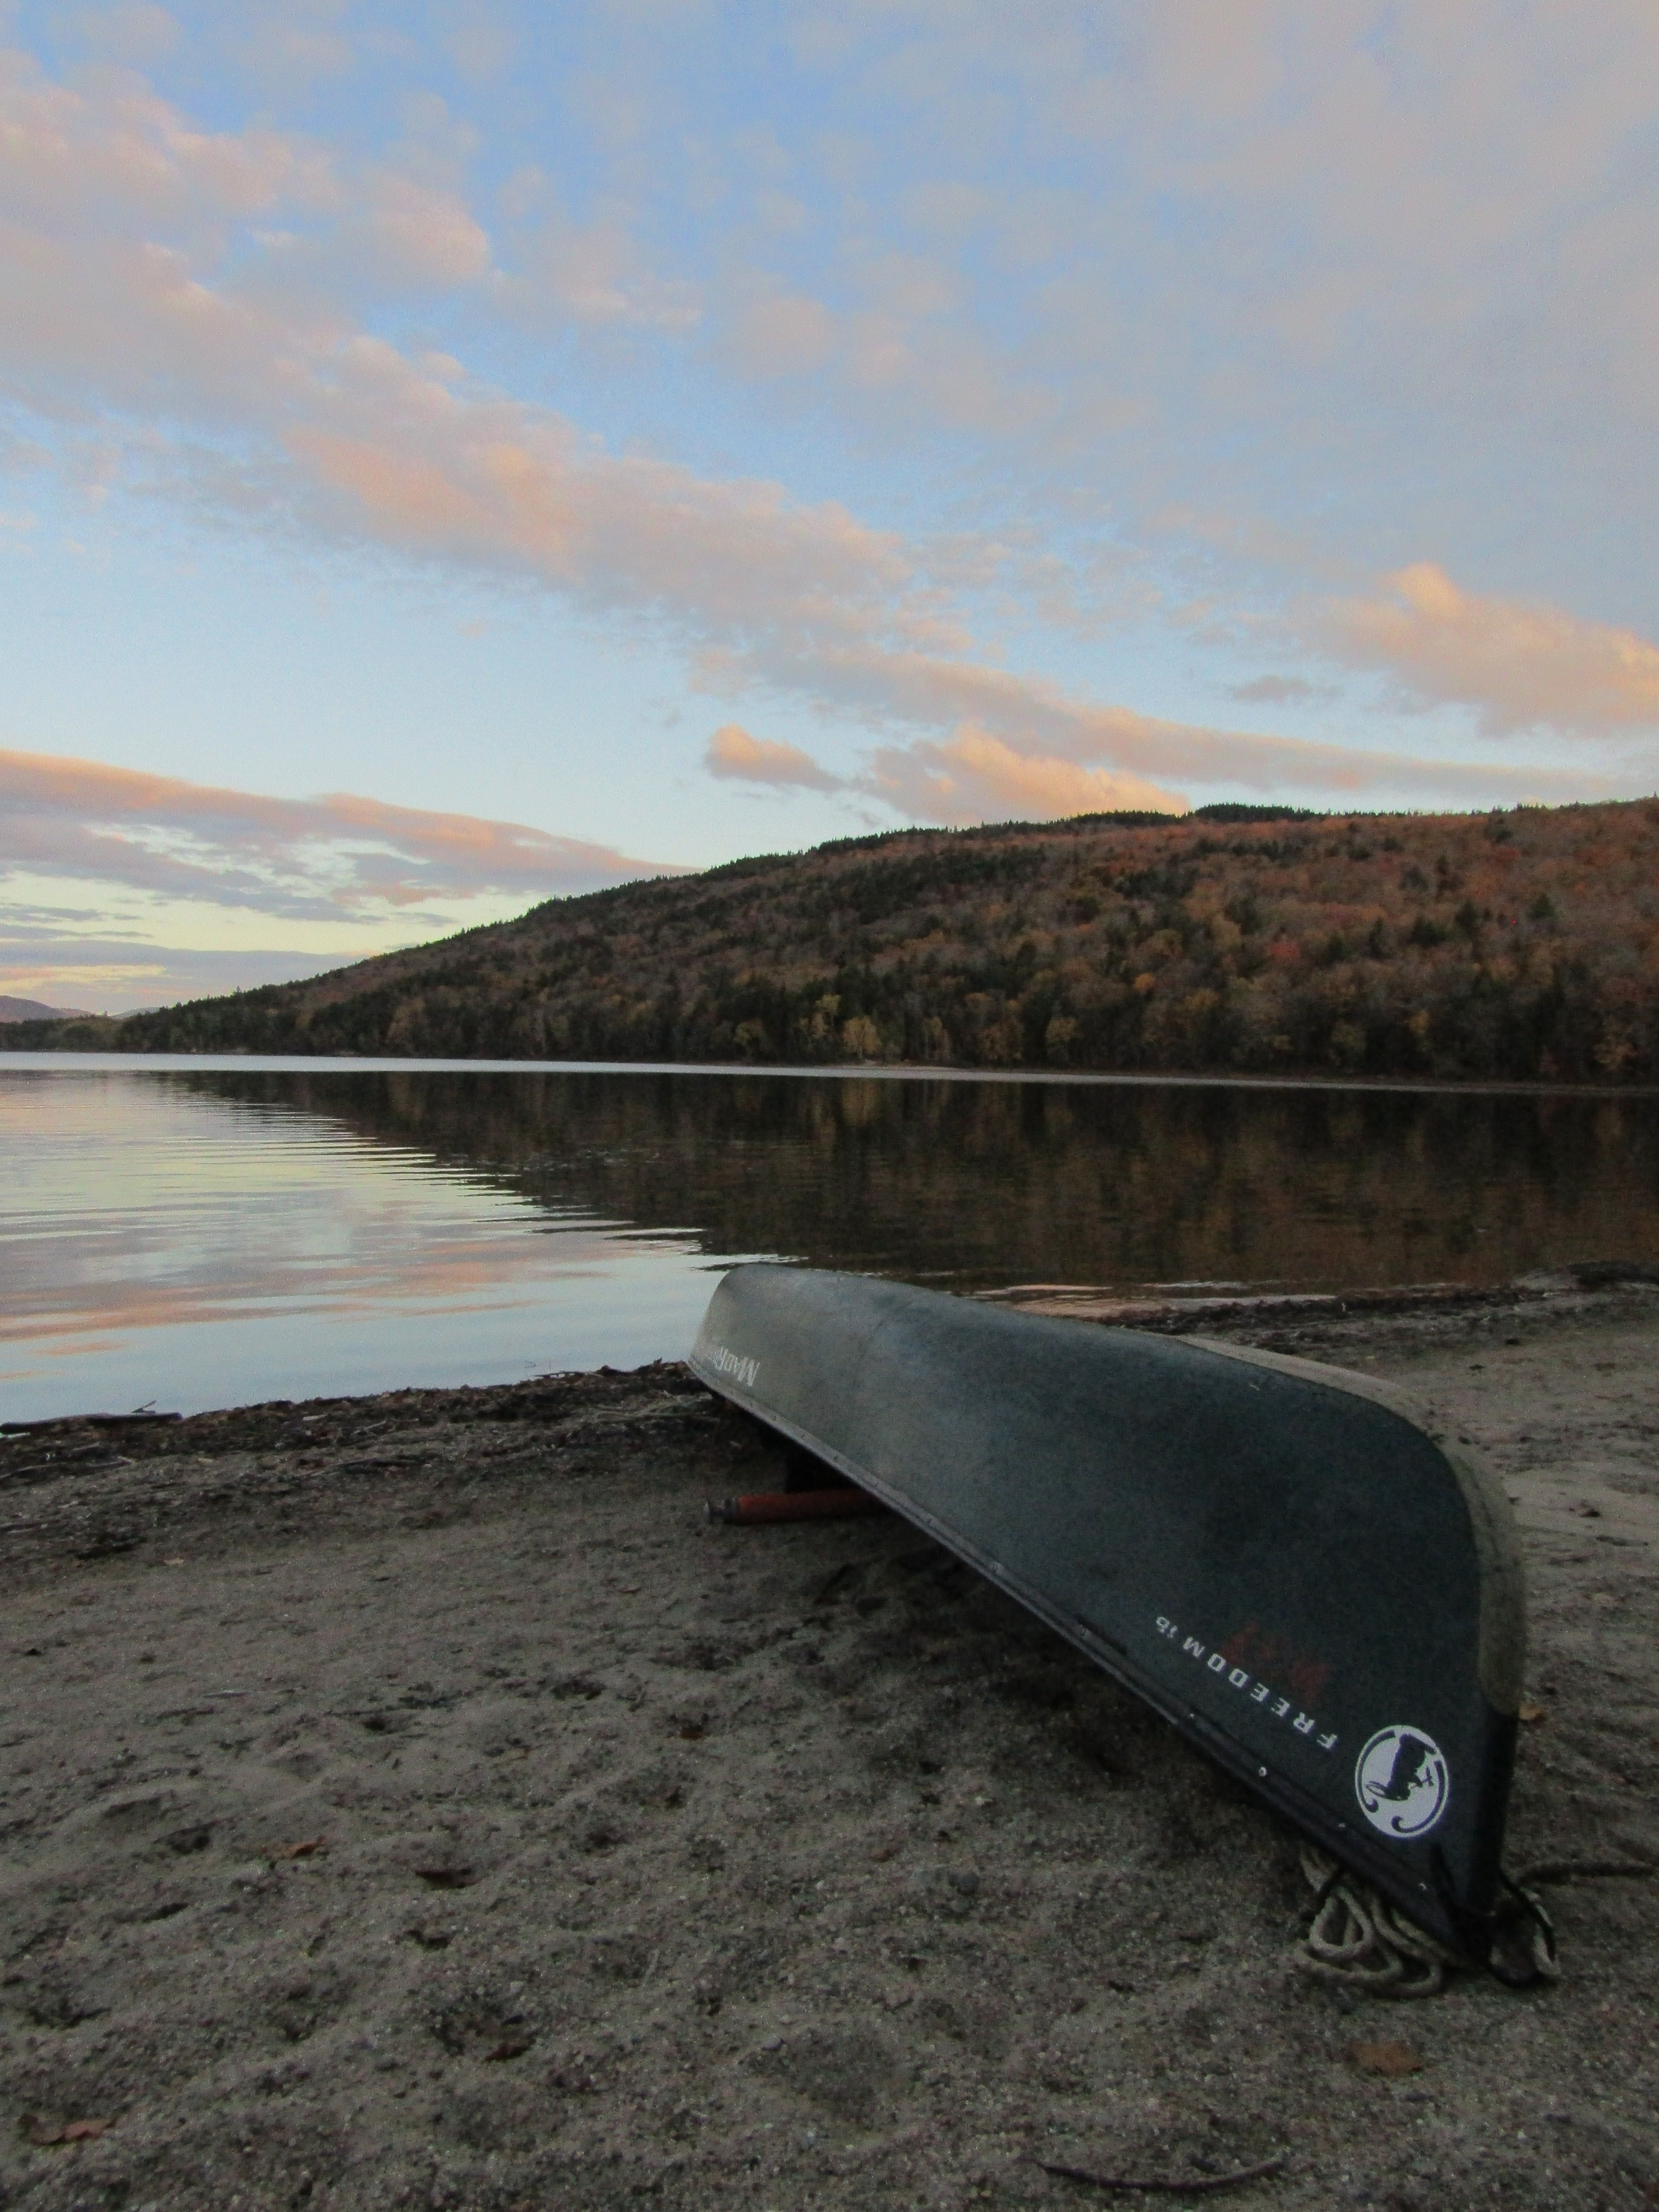 Camper submitted image from The Narrows- Attean Pond - 4